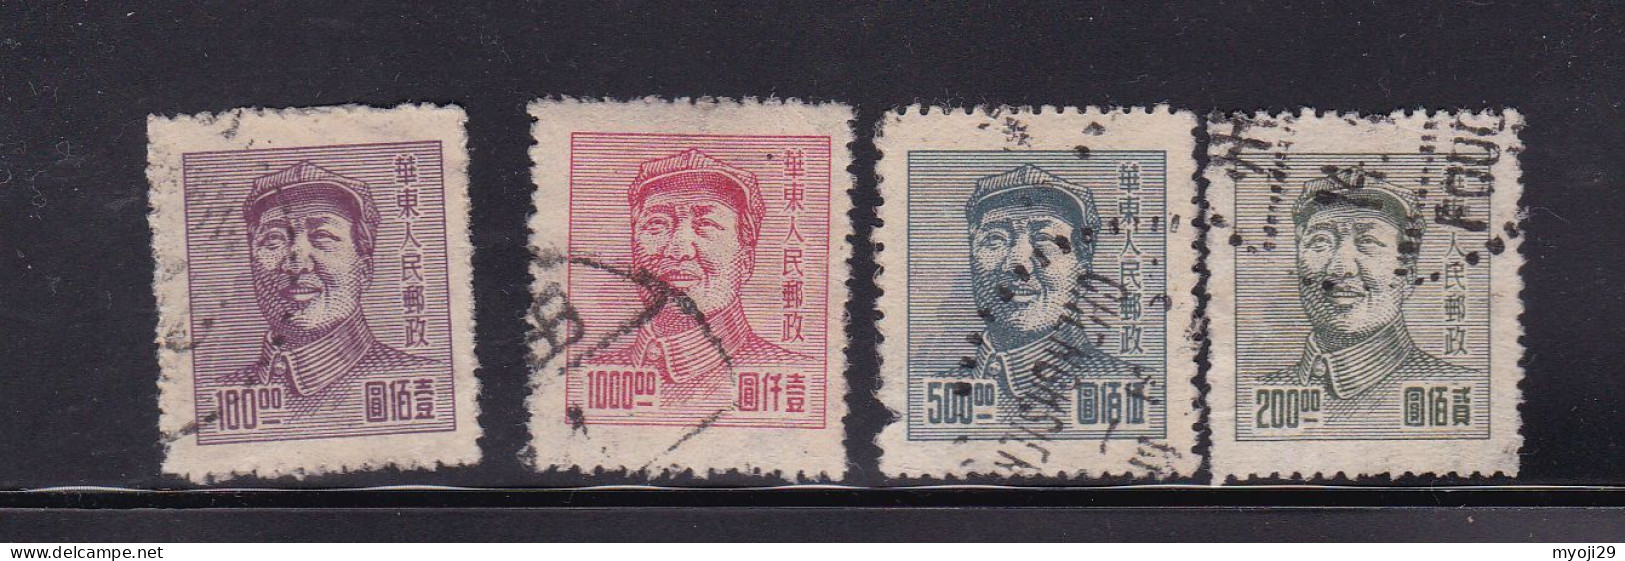 East China 1949 Mao Tse-tung $100,$200,$500,$1000 Used Stamps - Gebraucht